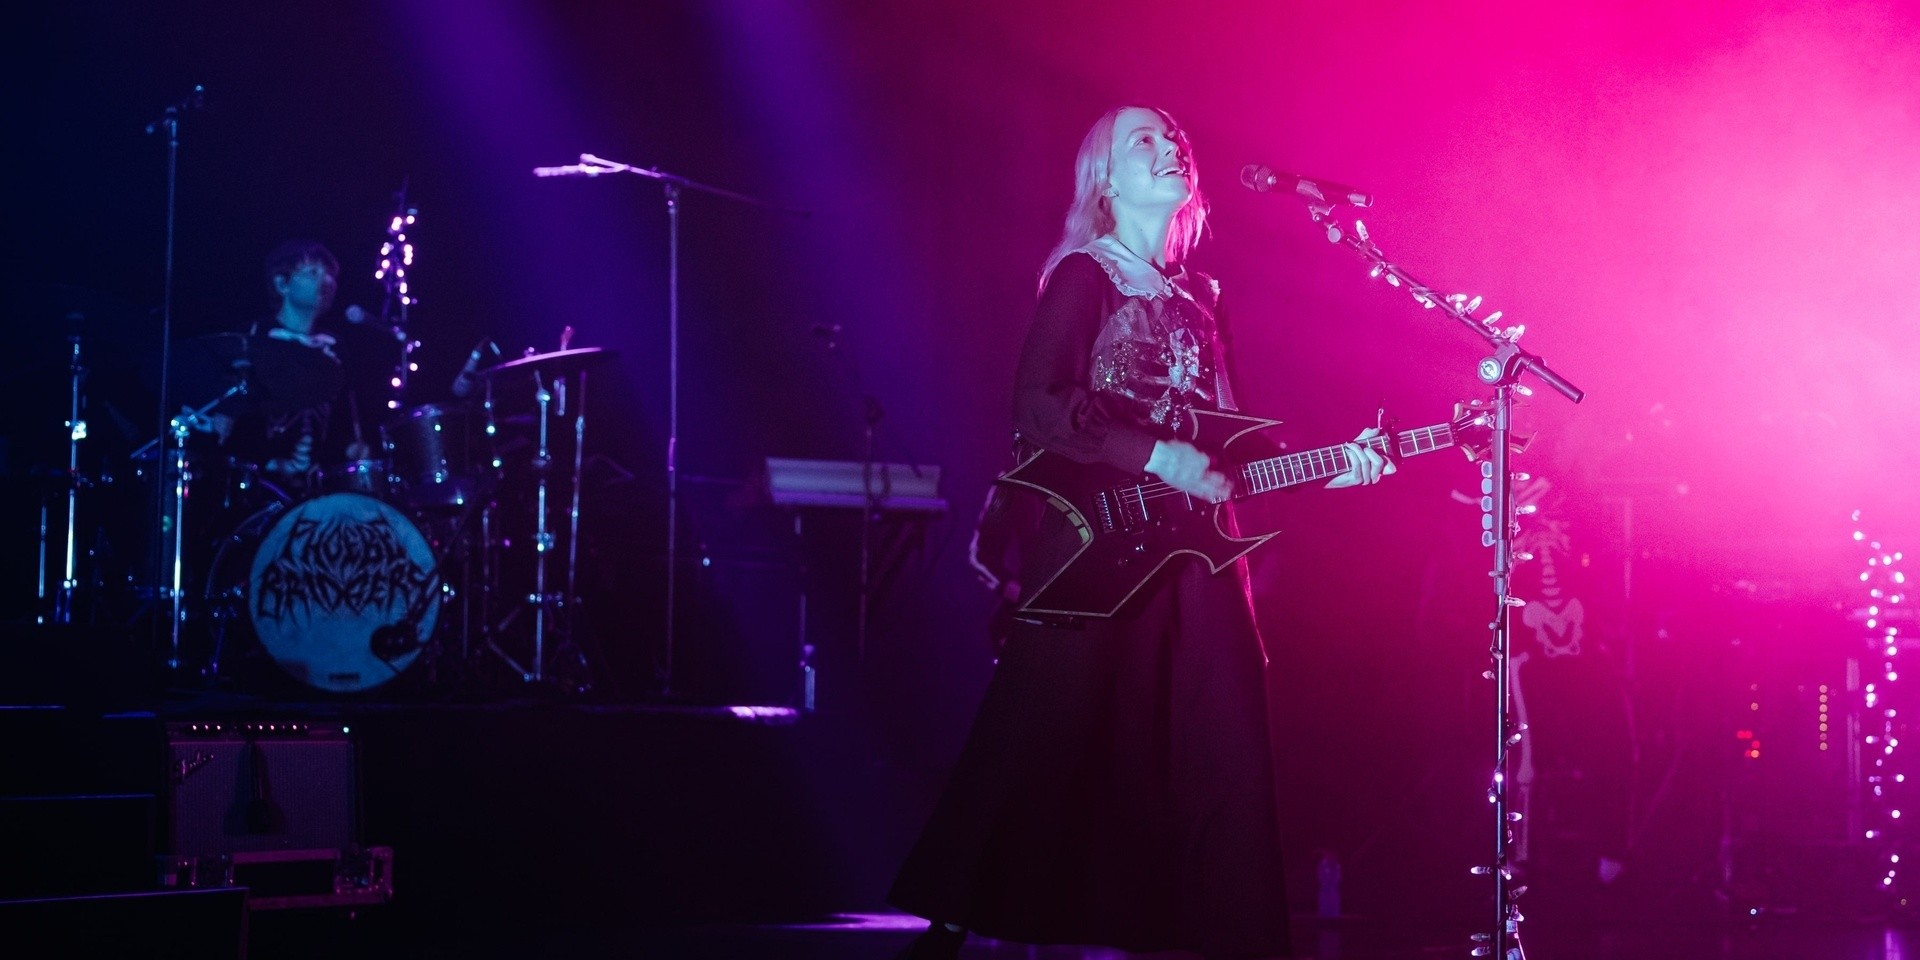 Phoebe Bridgers treats fans to a cathartic debut show at Singapore leg of 'Reunion Tour' — gig report